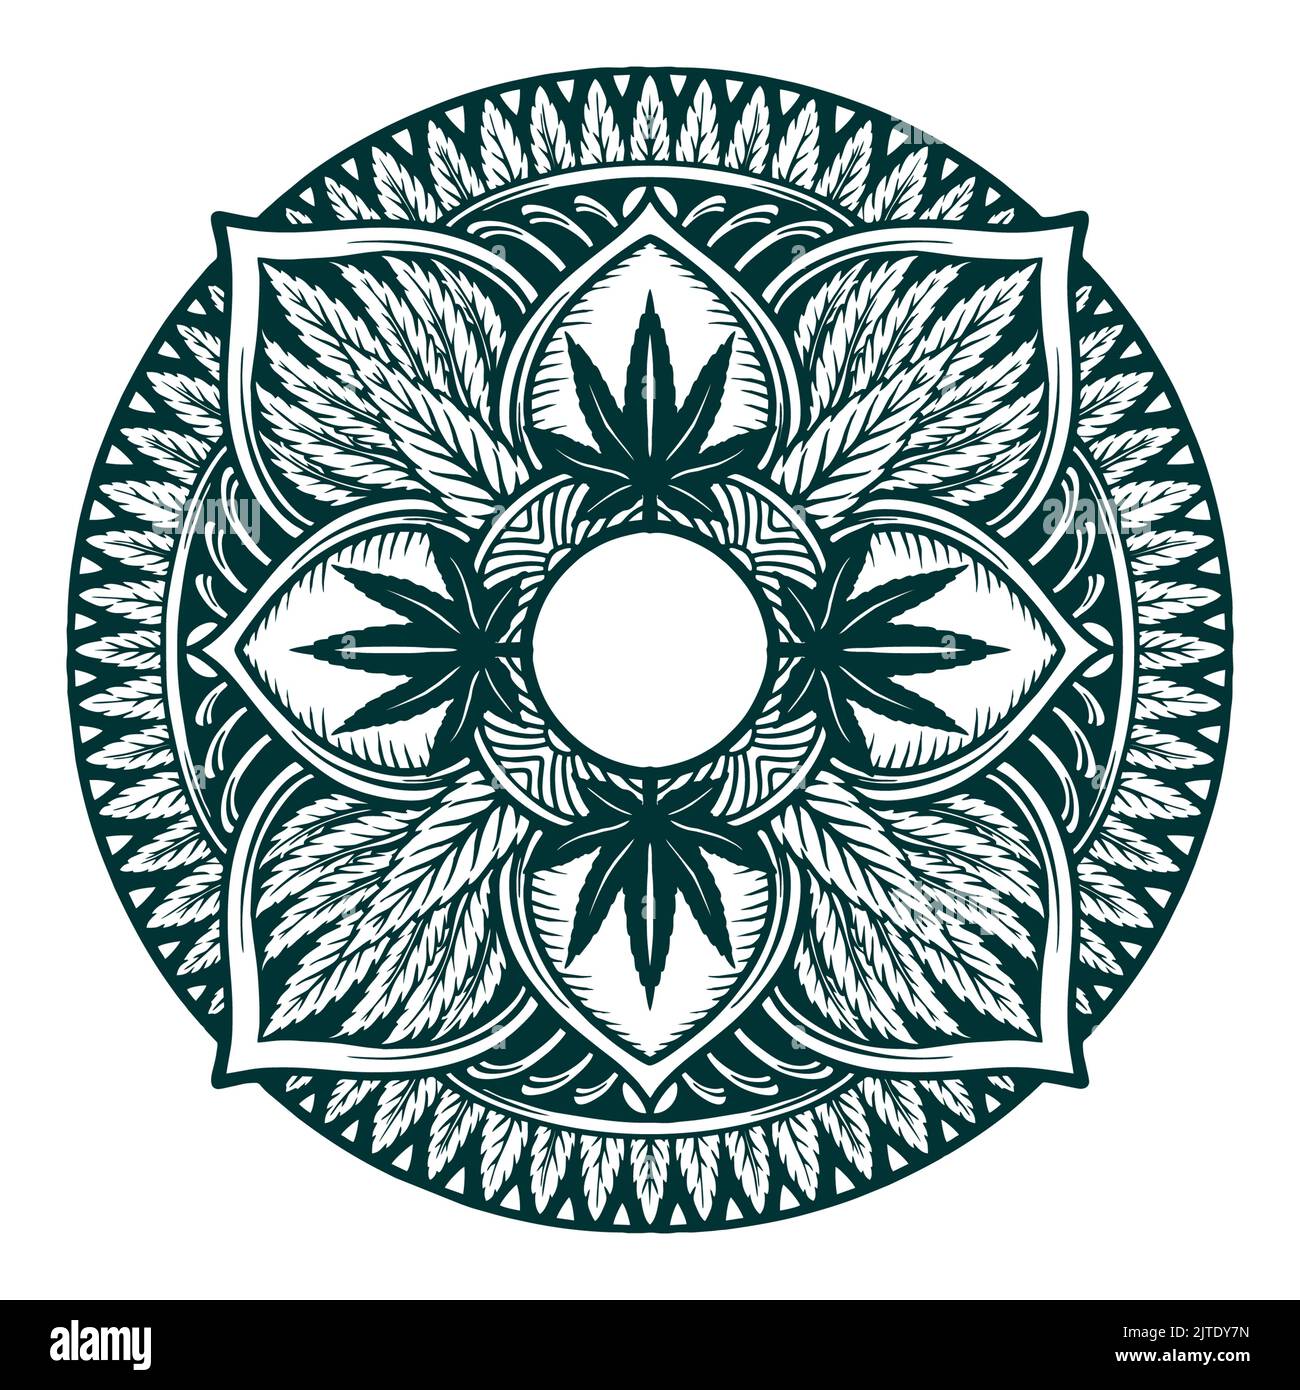 Cannabis Mandala Weed Leaf Silhouette Vector illustrations for your work Logo, mascot merchandise t-shirt, stickers and Label designs, poster, greetin Stock Photo